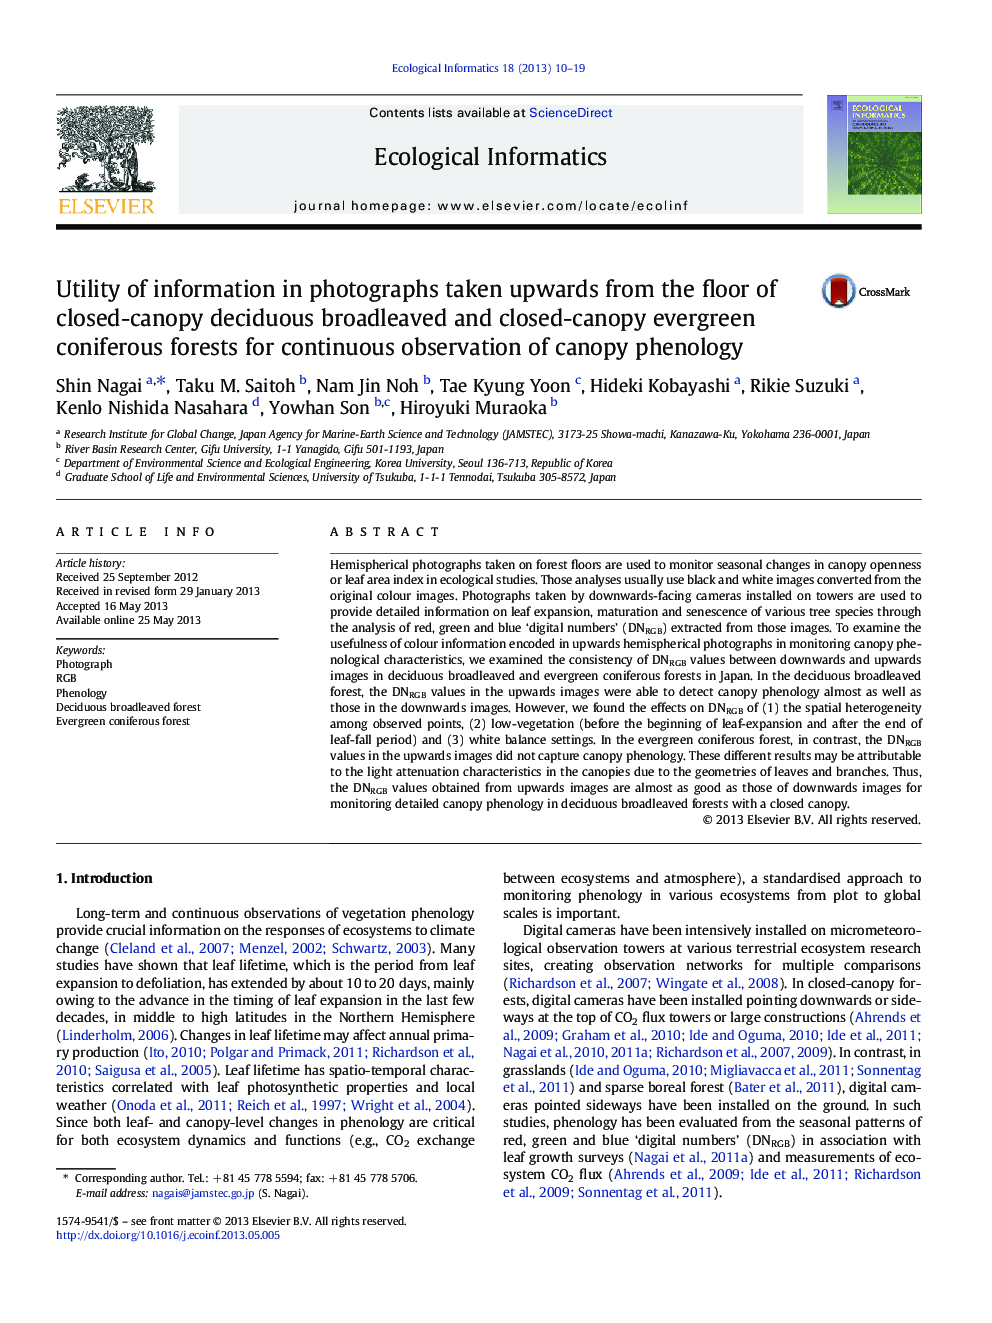 Utility of information in photographs taken upwards from the floor of closed-canopy deciduous broadleaved and closed-canopy evergreen coniferous forests for continuous observation of canopy phenology